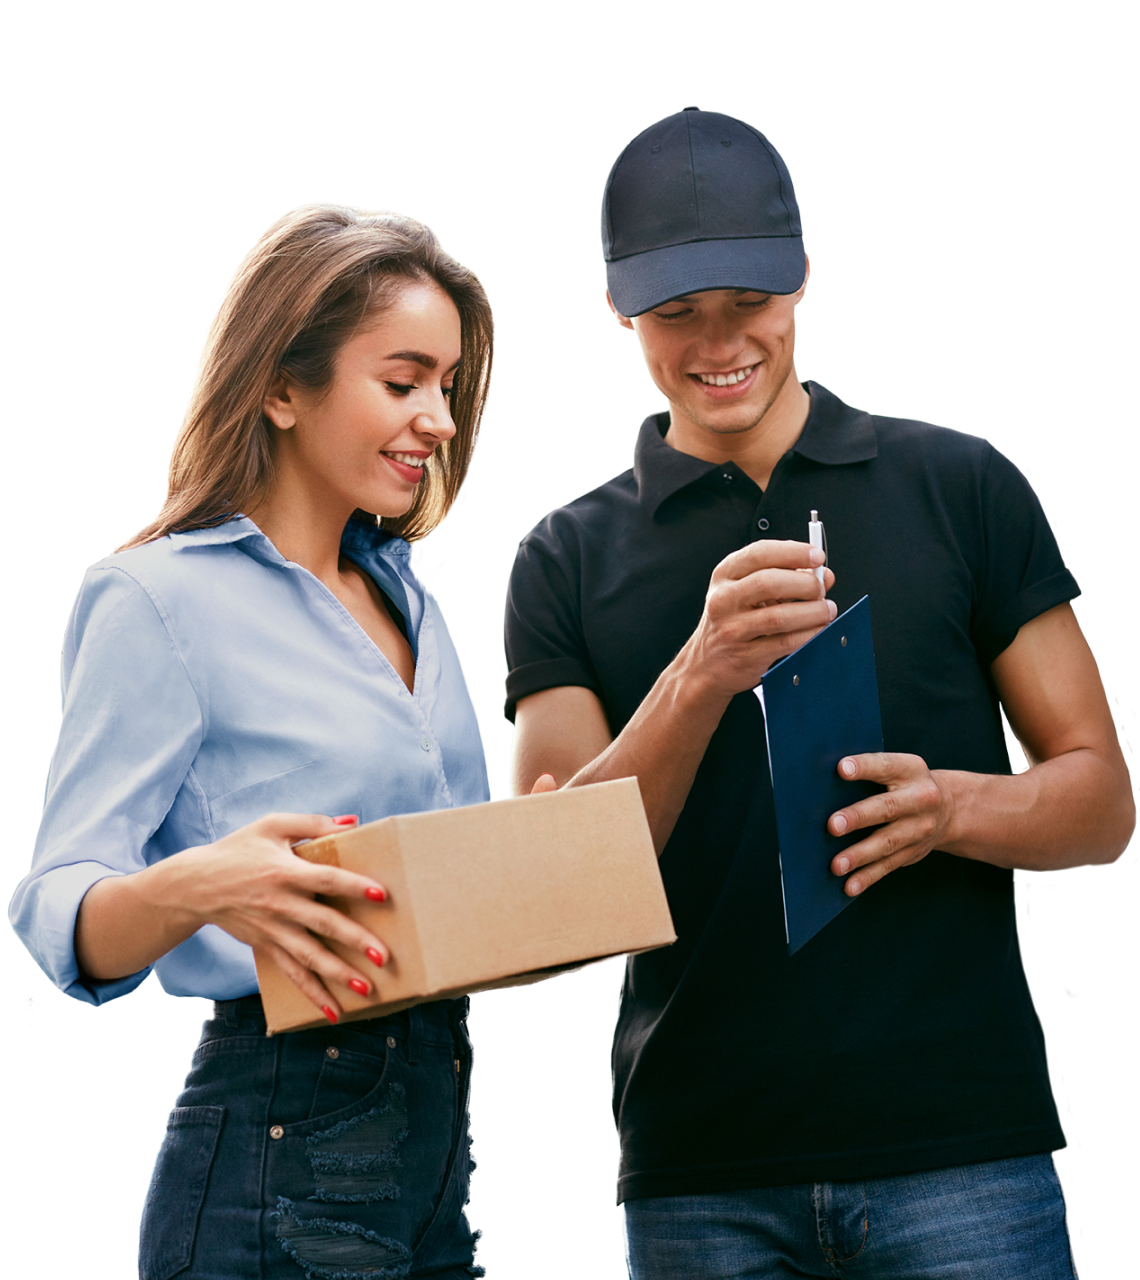 Fastest Express Courier Service in India - courier with a parcel for a customer - borzo delivery